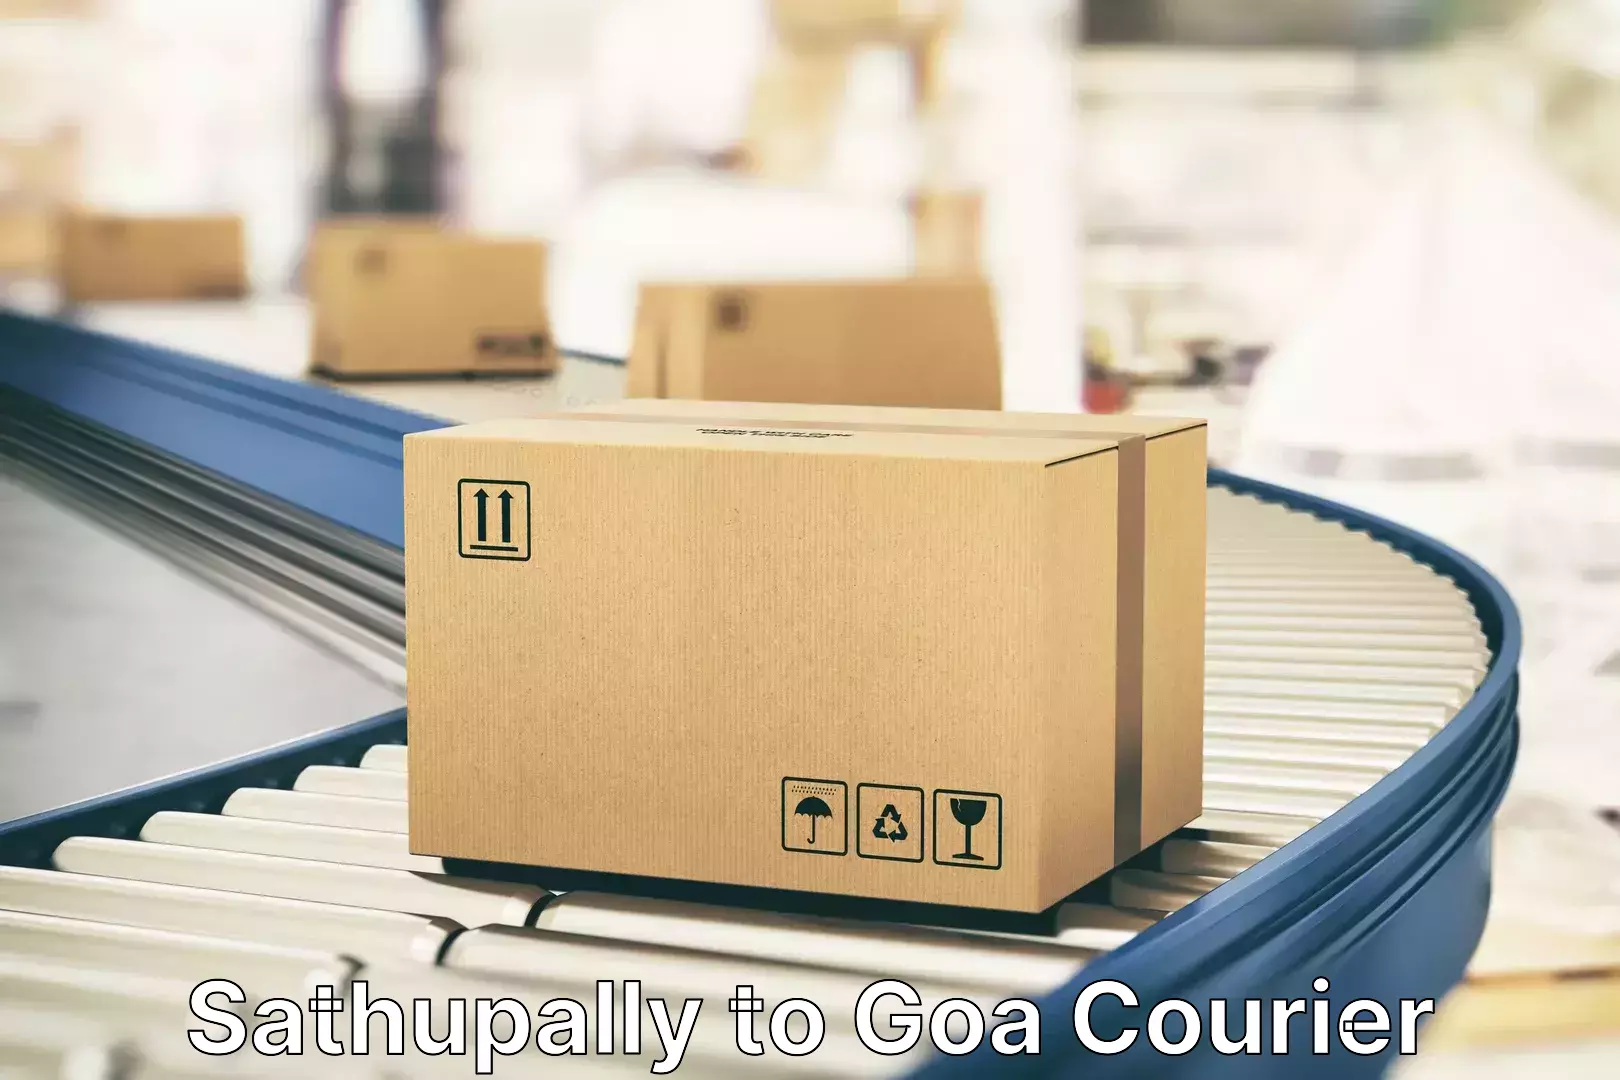 Baggage transport management Sathupally to Goa